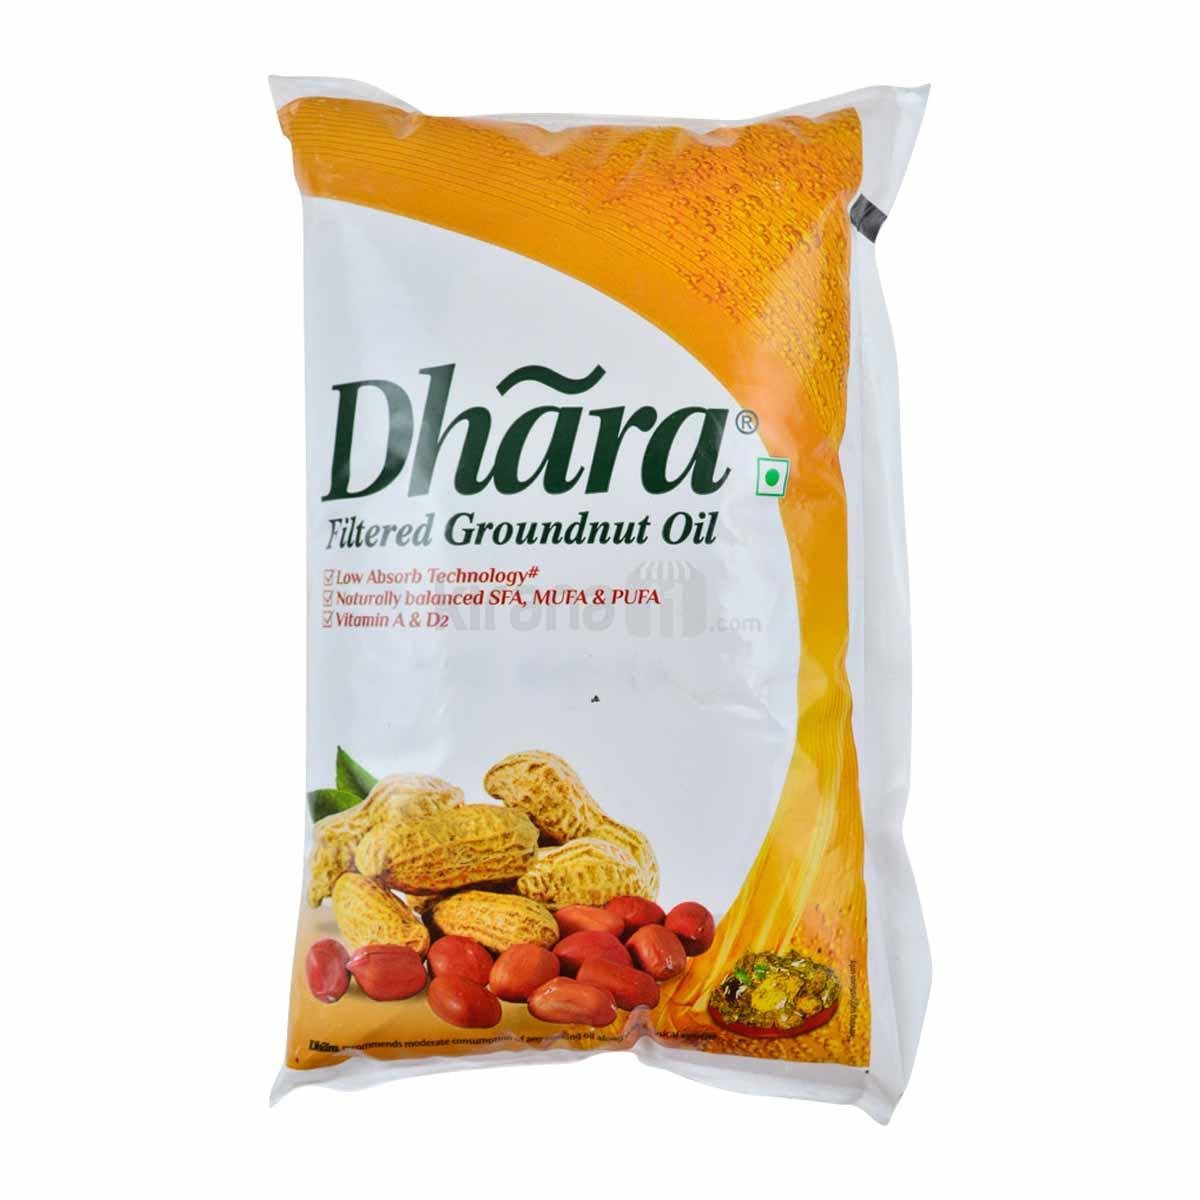 dhara-recommends-people-to-use-less-oil-in-cooking